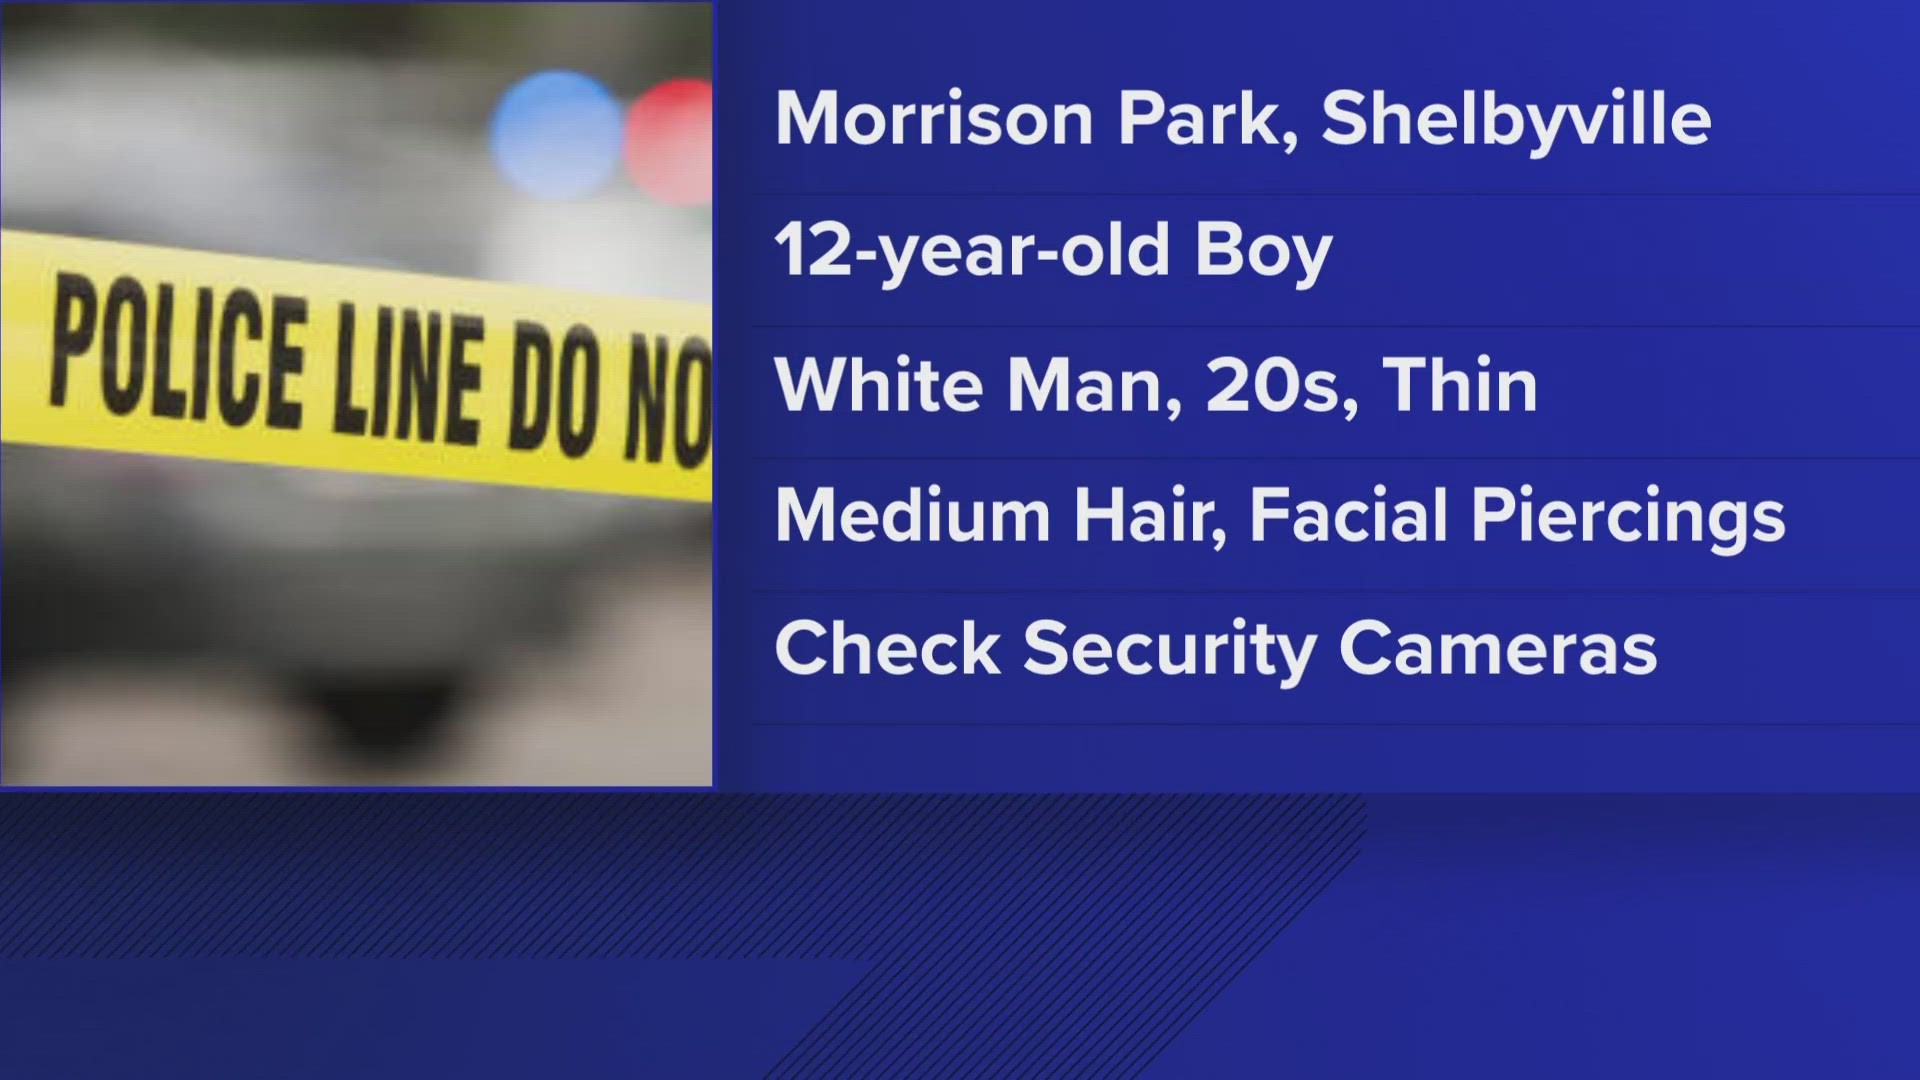 A spokesperson for the police department said it happened at Morrison Park on Friday, May 12.